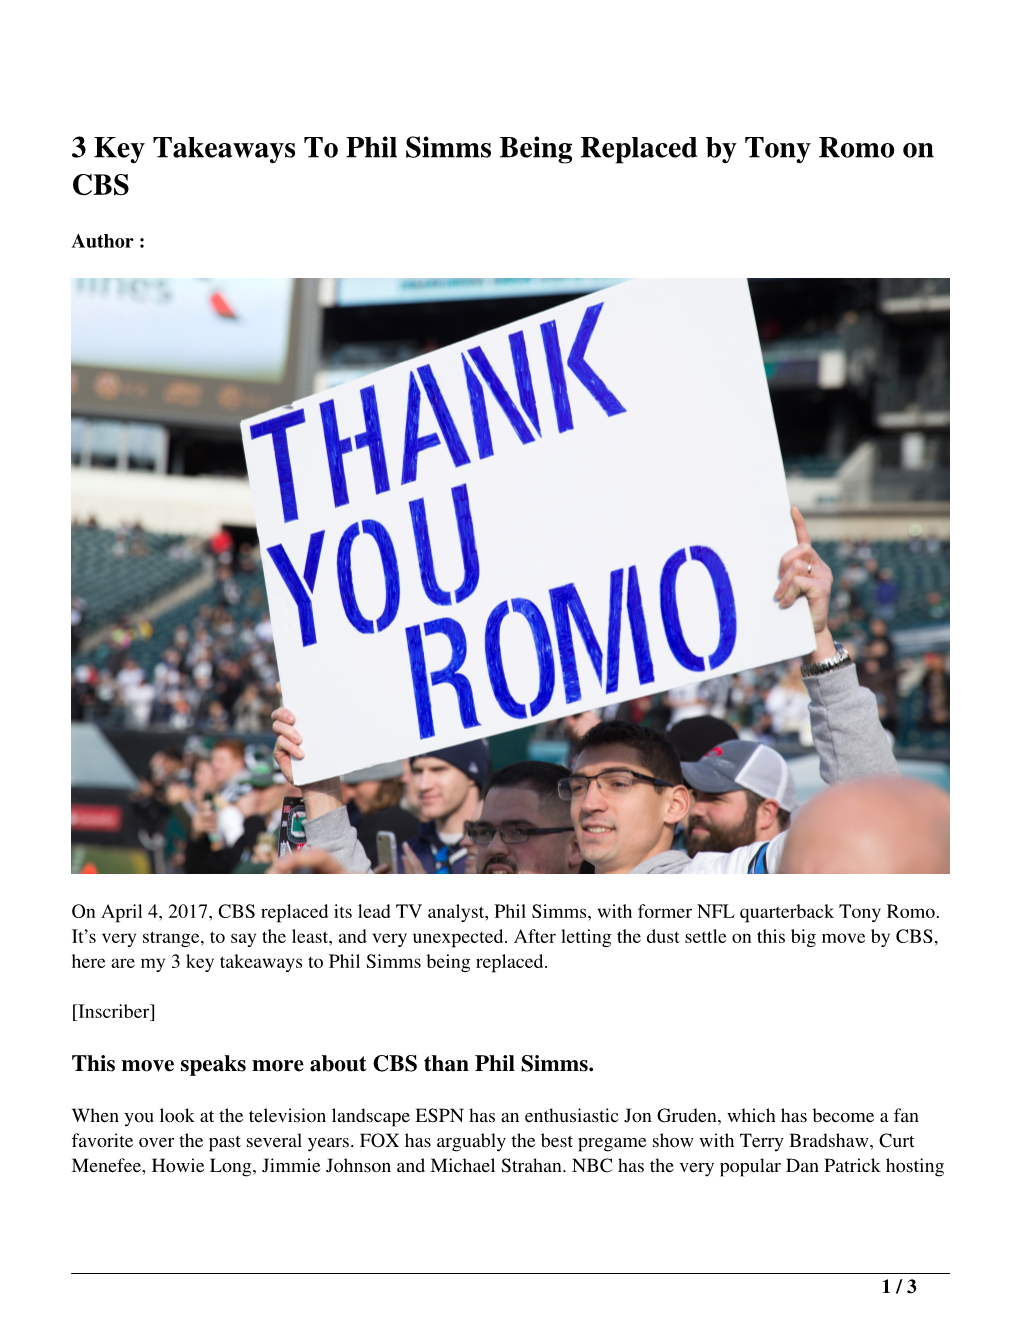 3 Key Takeaways to Phil Simms Being Replaced by Tony Romo on CBS